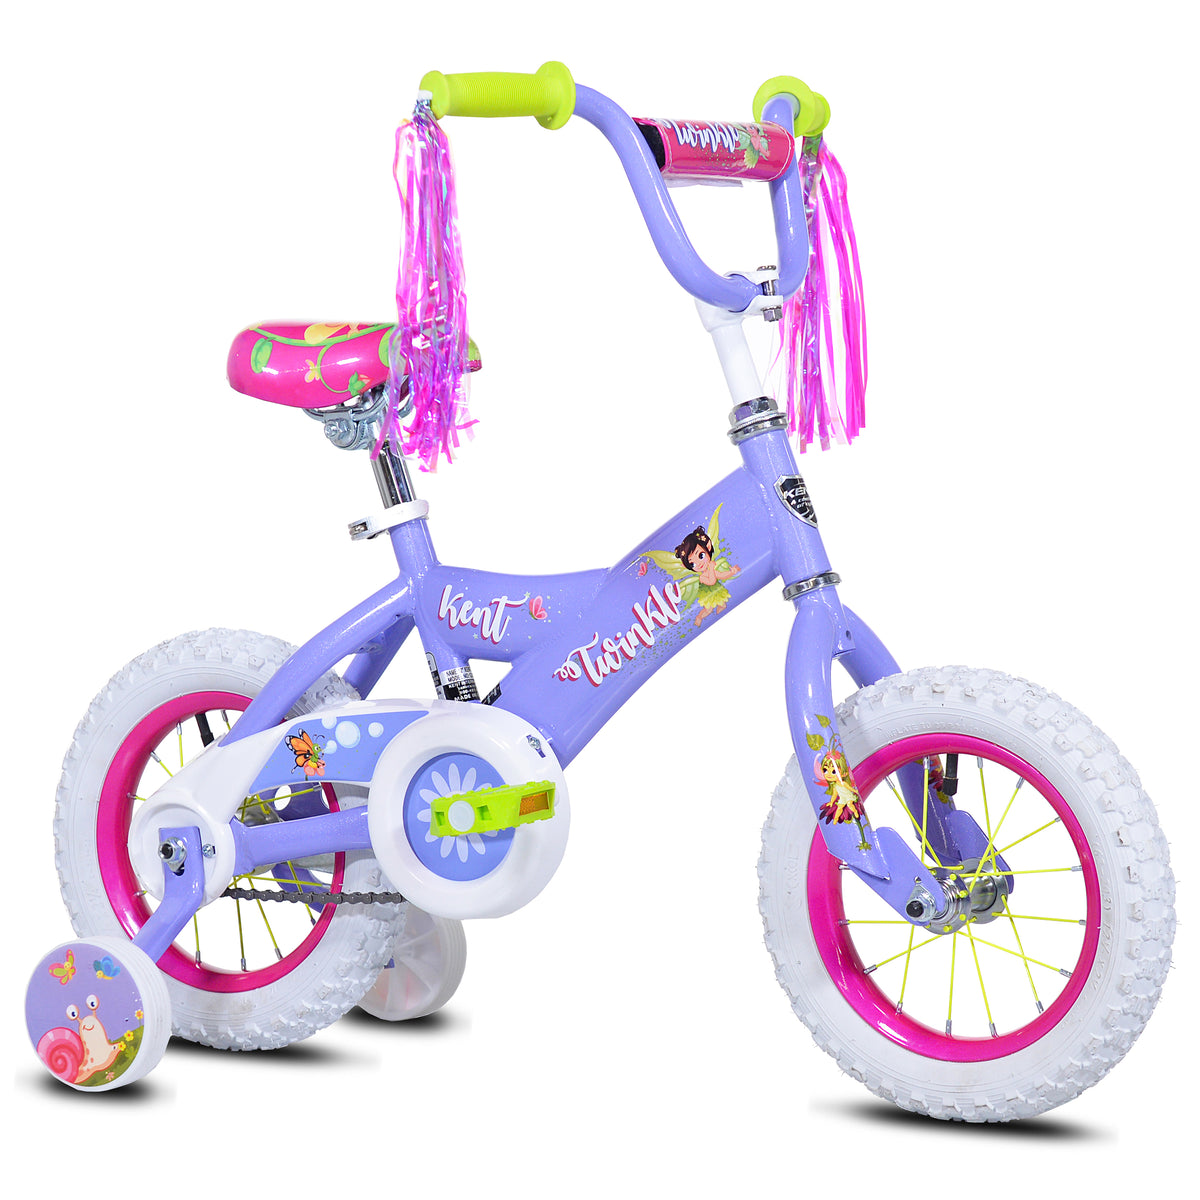 12" Kent Twinkle | Bike for Kids Ages 2-4